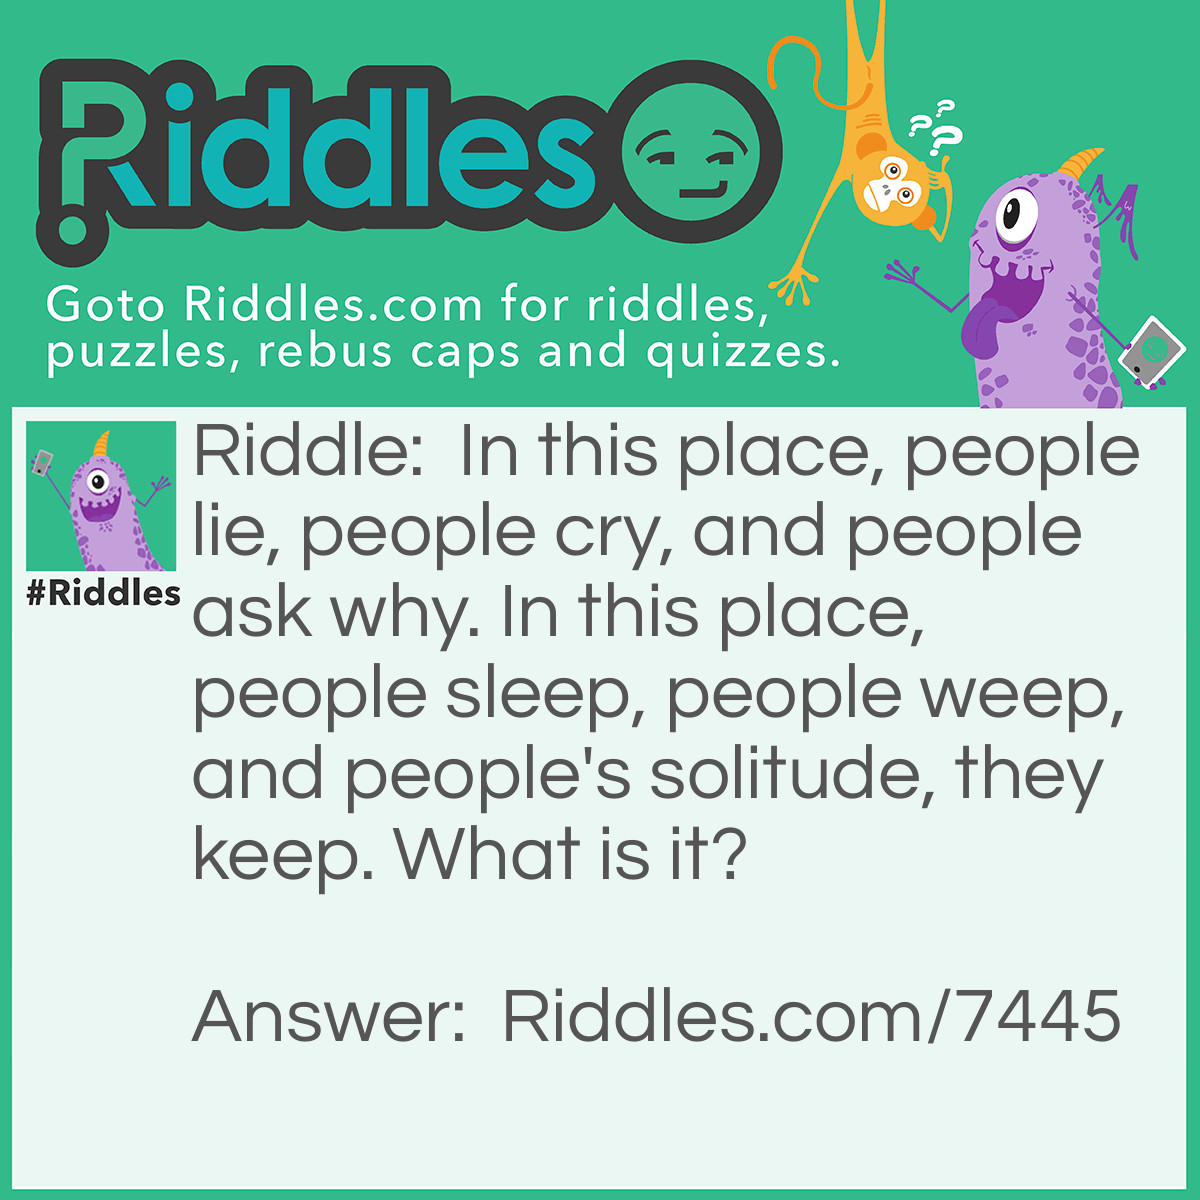 Riddle: In this place, people lie, people cry, and people ask why. In this place, people sleep, people weep, and people's solitude, they keep. What is it? Answer: "Graveyard" or "Cemetery" - Reasoning: Both "people lie" and "people sleep" are indications of many people using this place to lie down, or to sleep, which in itself is an odd thought. Crying and weeping indicate that this is a sad place, and the continued use of "people" allows this to mean not just those who are lying down or sleeping, but those who come to visit them there, (i.e. mourners). People come to ask the person grave why they did what they did that resulted in their death, as a form of mourning, or to ask their chosen God or Gods why they took that person to their grave. And peoples solitude refers to people sleeping on their own, or the mourners usually coming the mourn privately.